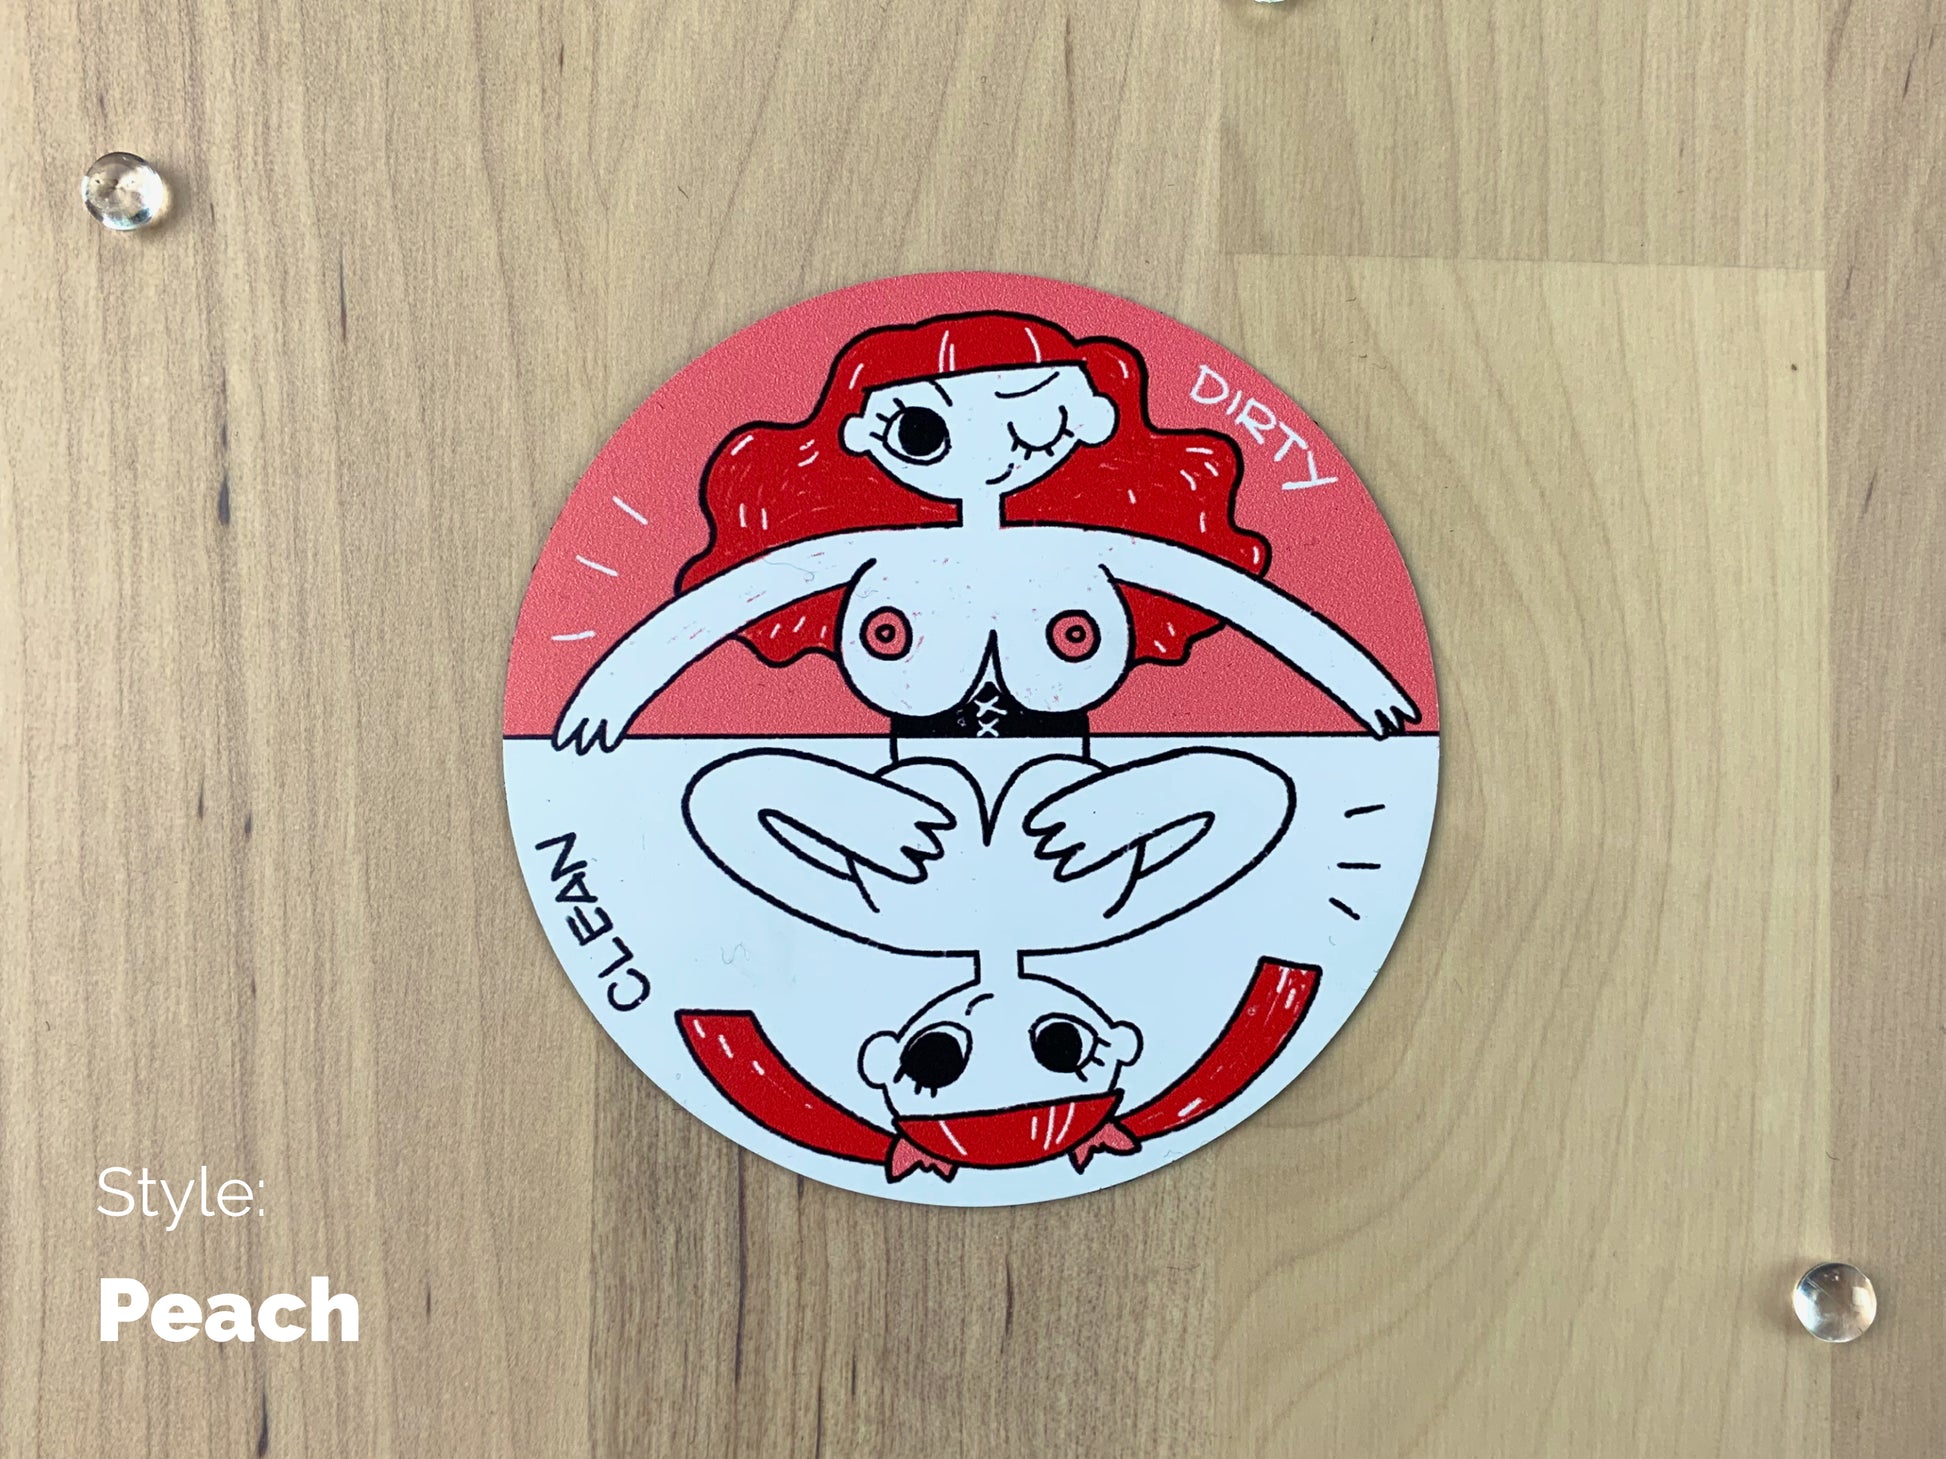 A circular sheet magnet with a sassy illustration of a redhead lady with her top off on the dirty half, and covering her boobies on the clean half.